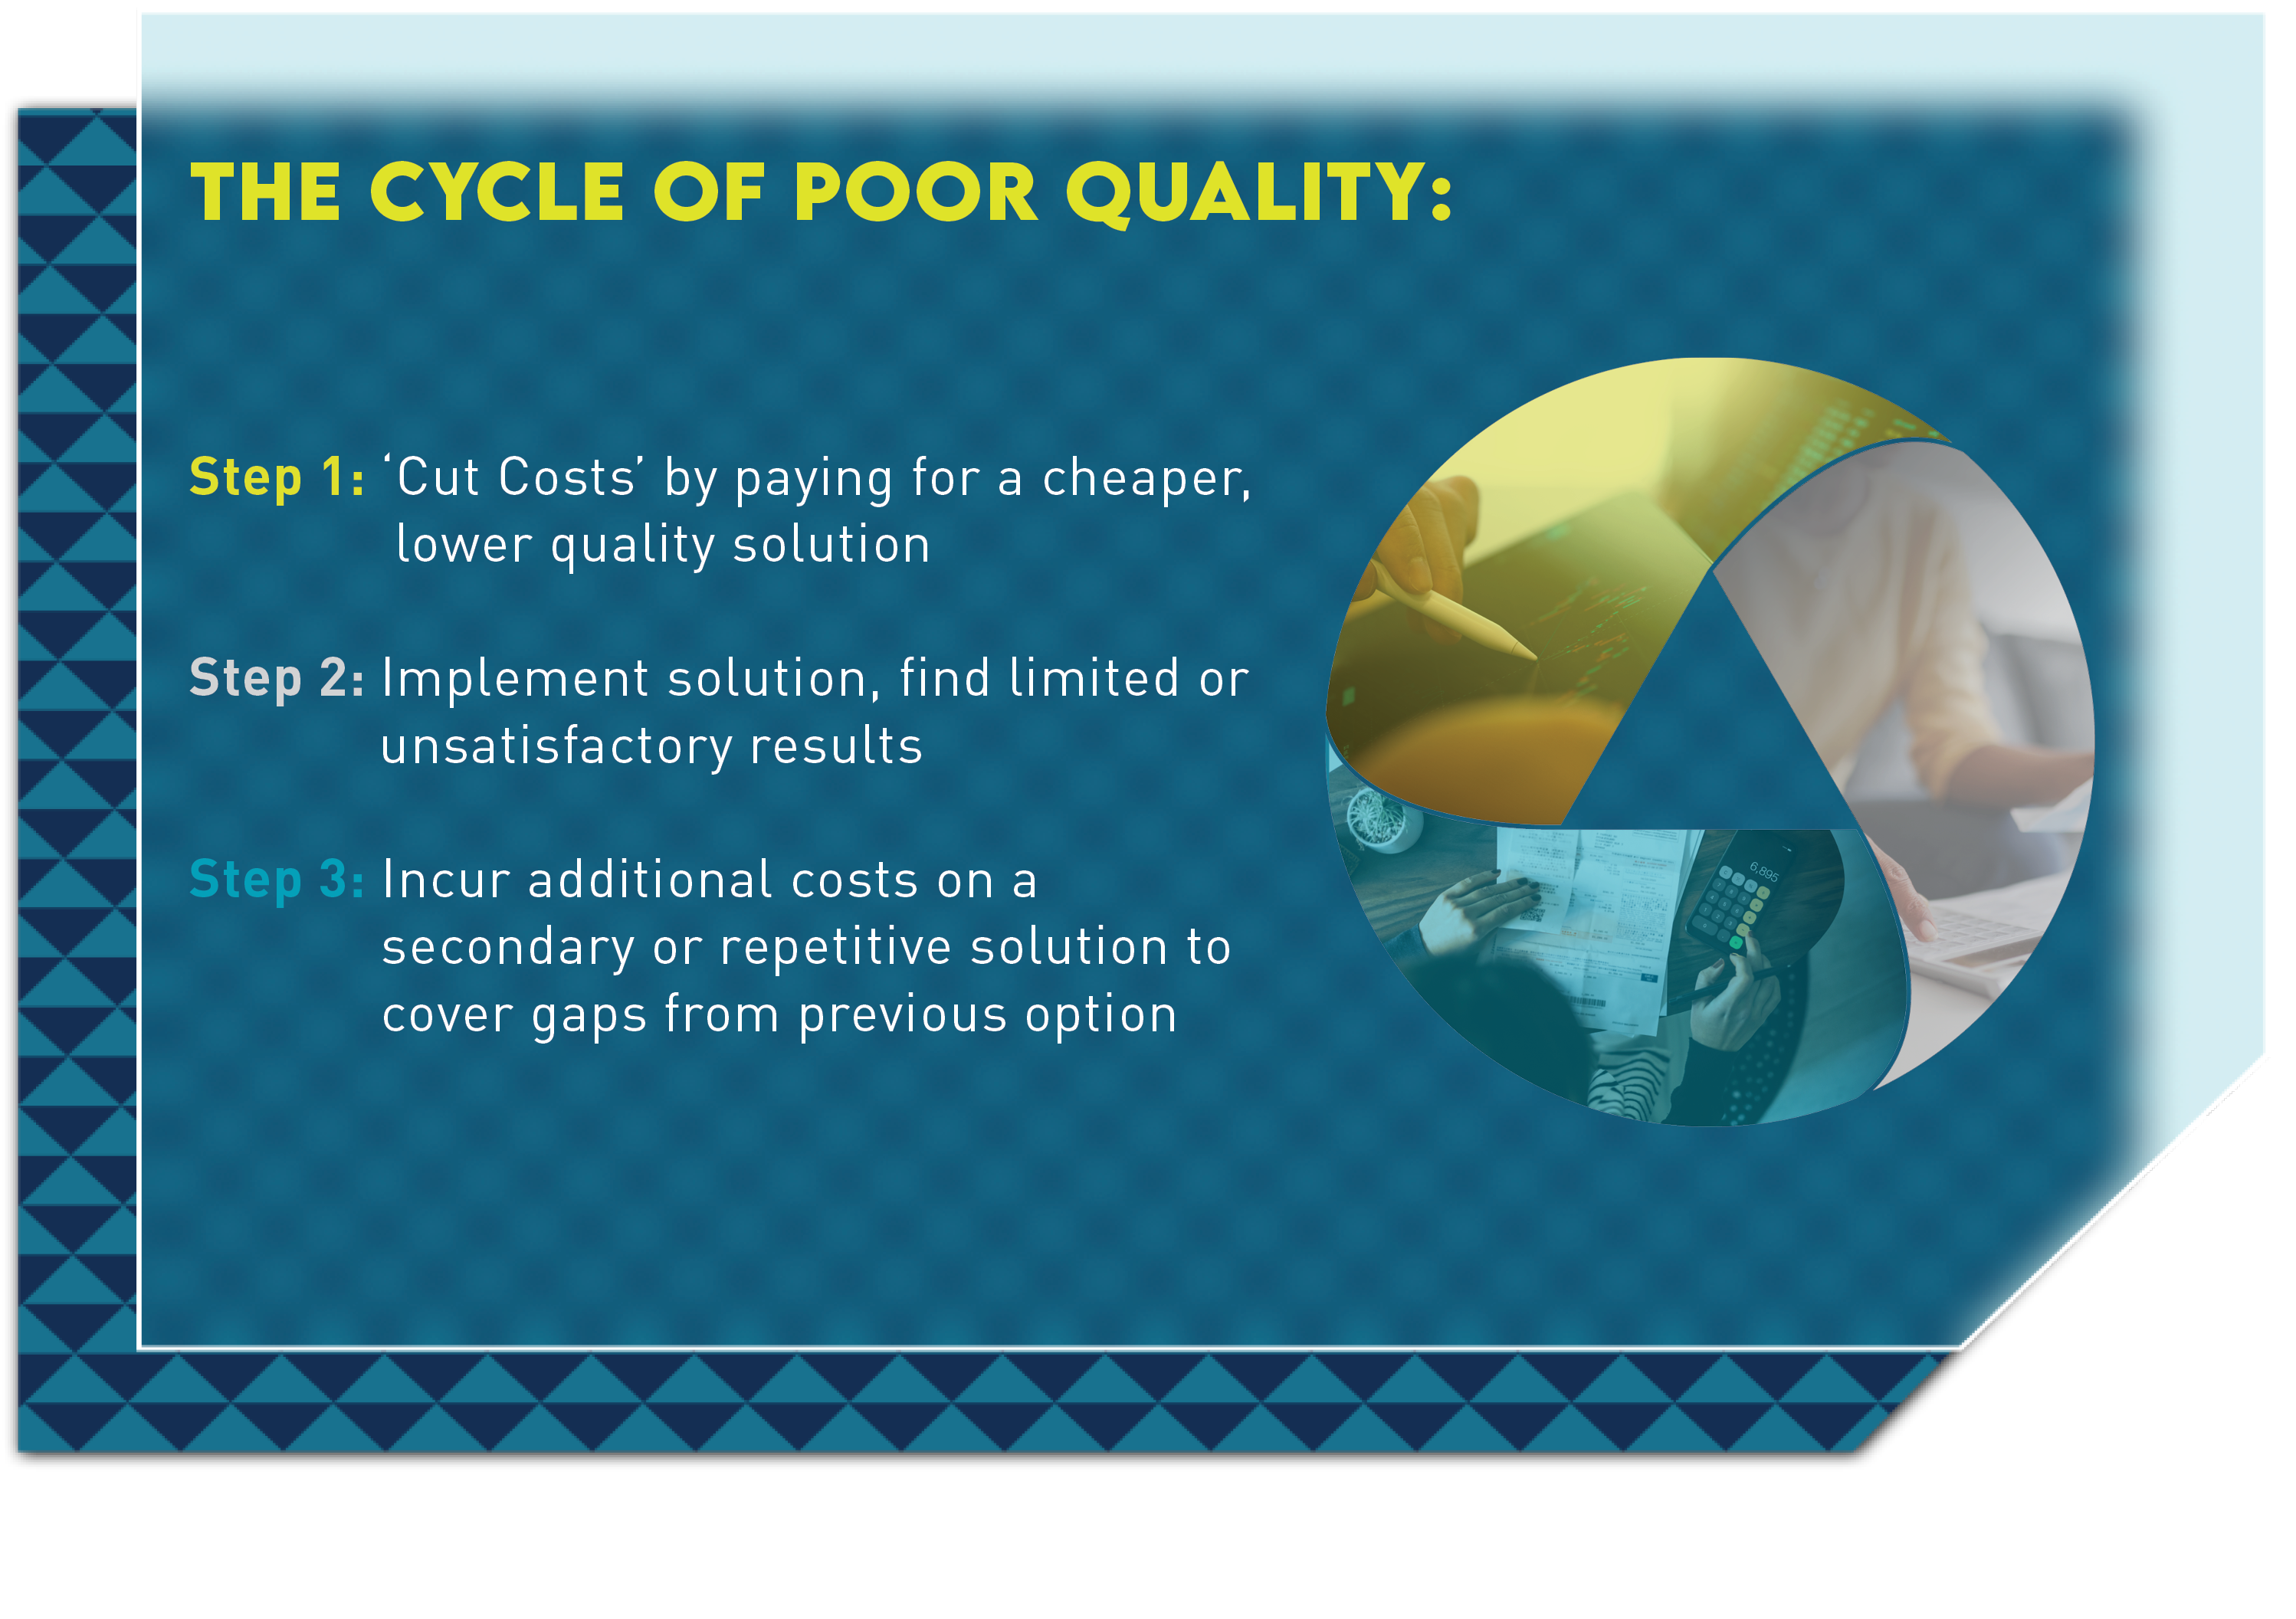 The cycle of poor quality